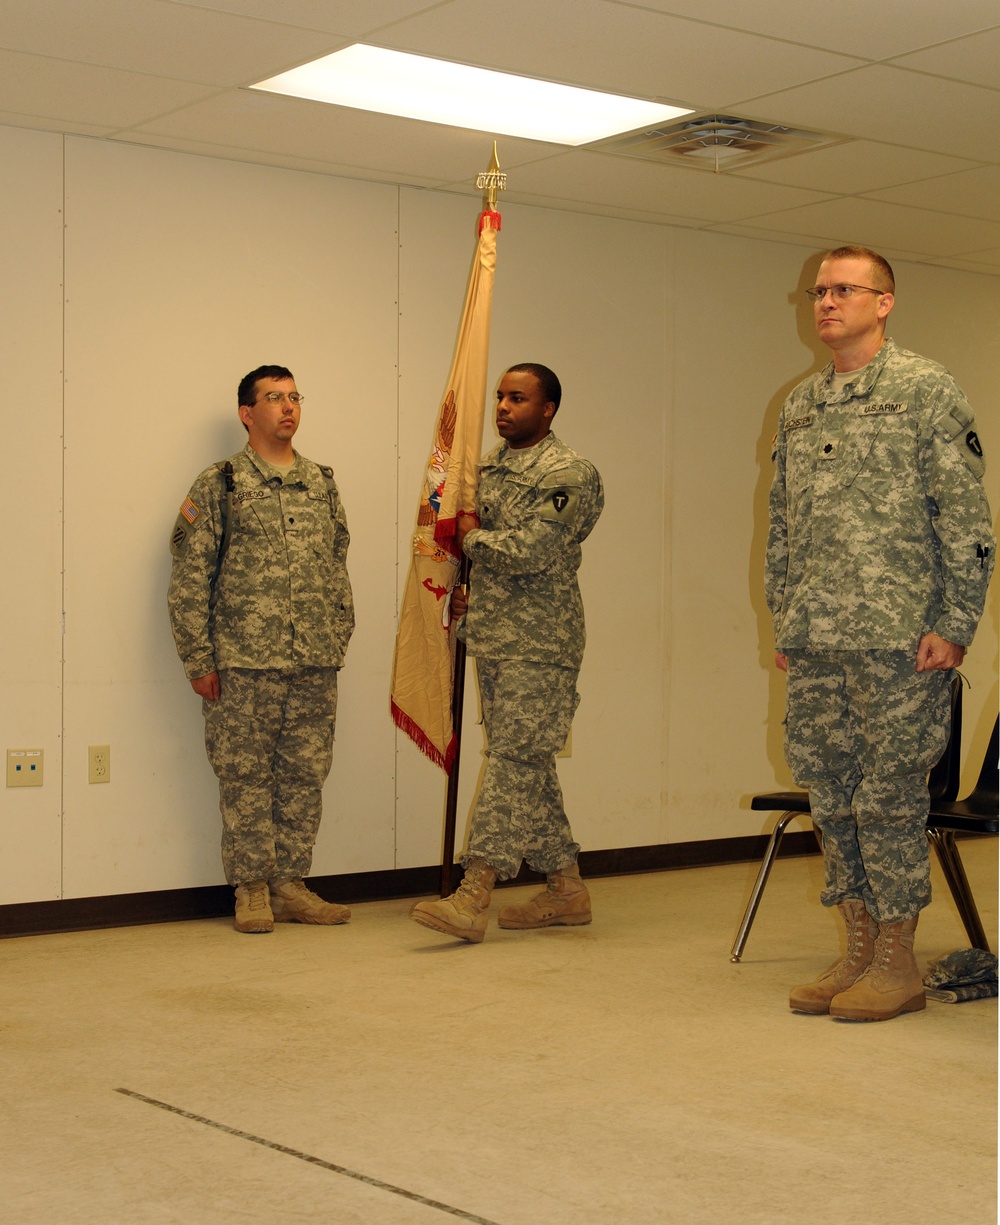 Ceremony welcomes new leaders into NCO Corps